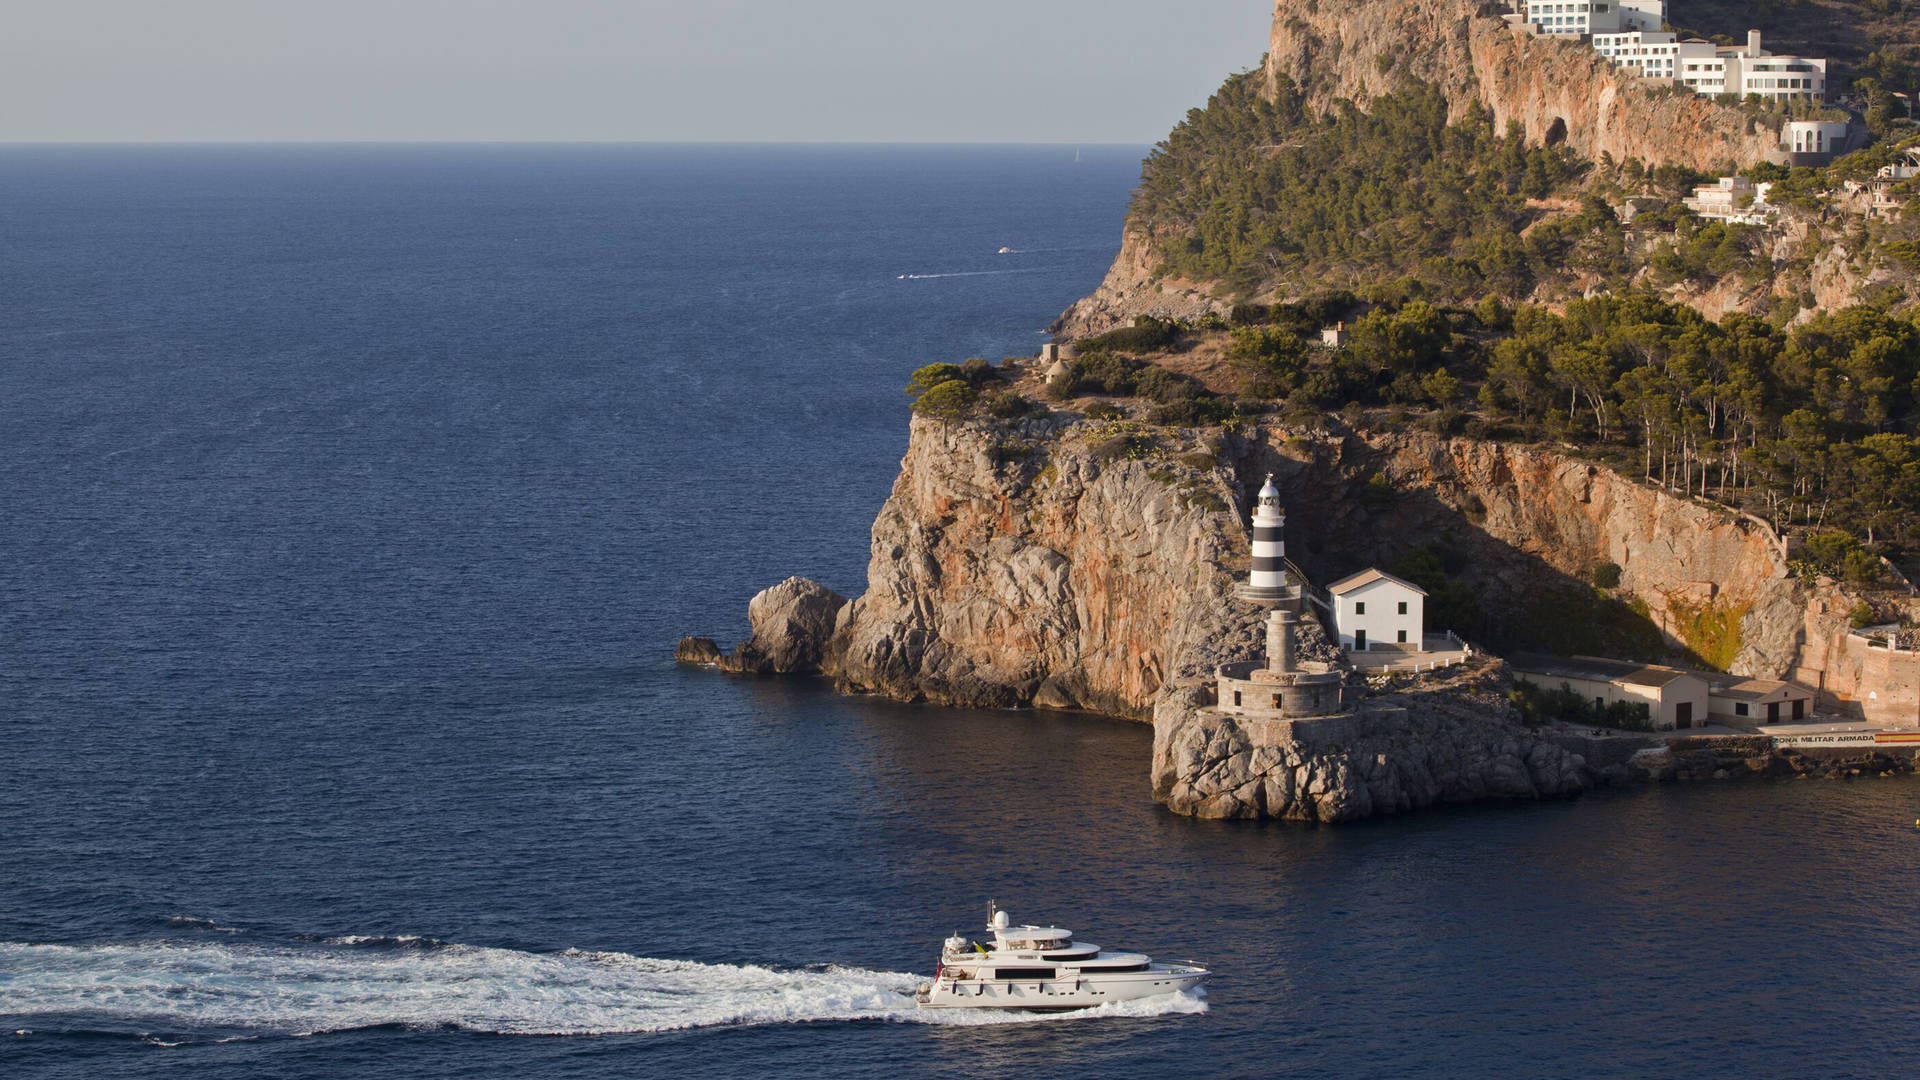  Jumeirah Port Soller Hotel Spa boat and lighthouse